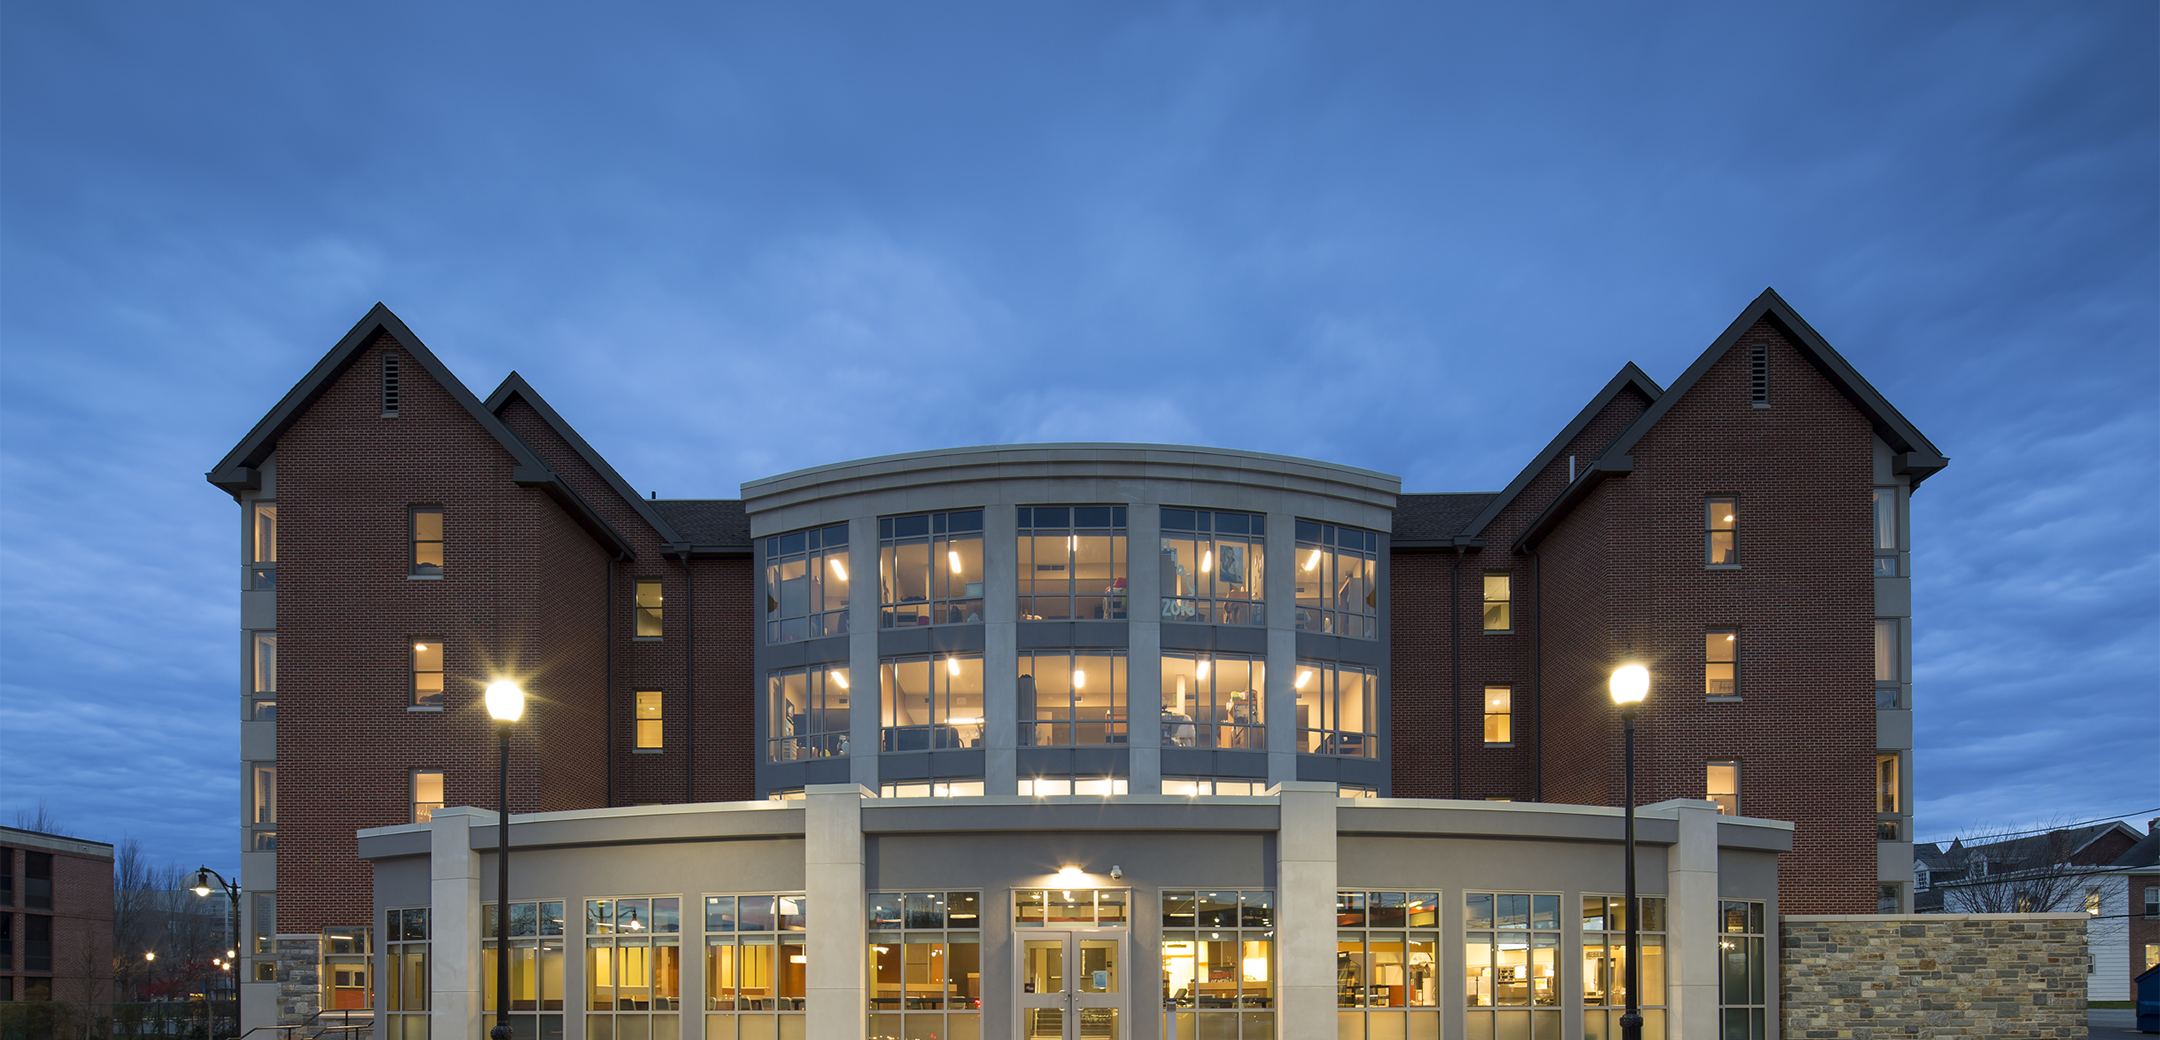 An evening view of the 4-story Widener University building back side entrance featuring a curved